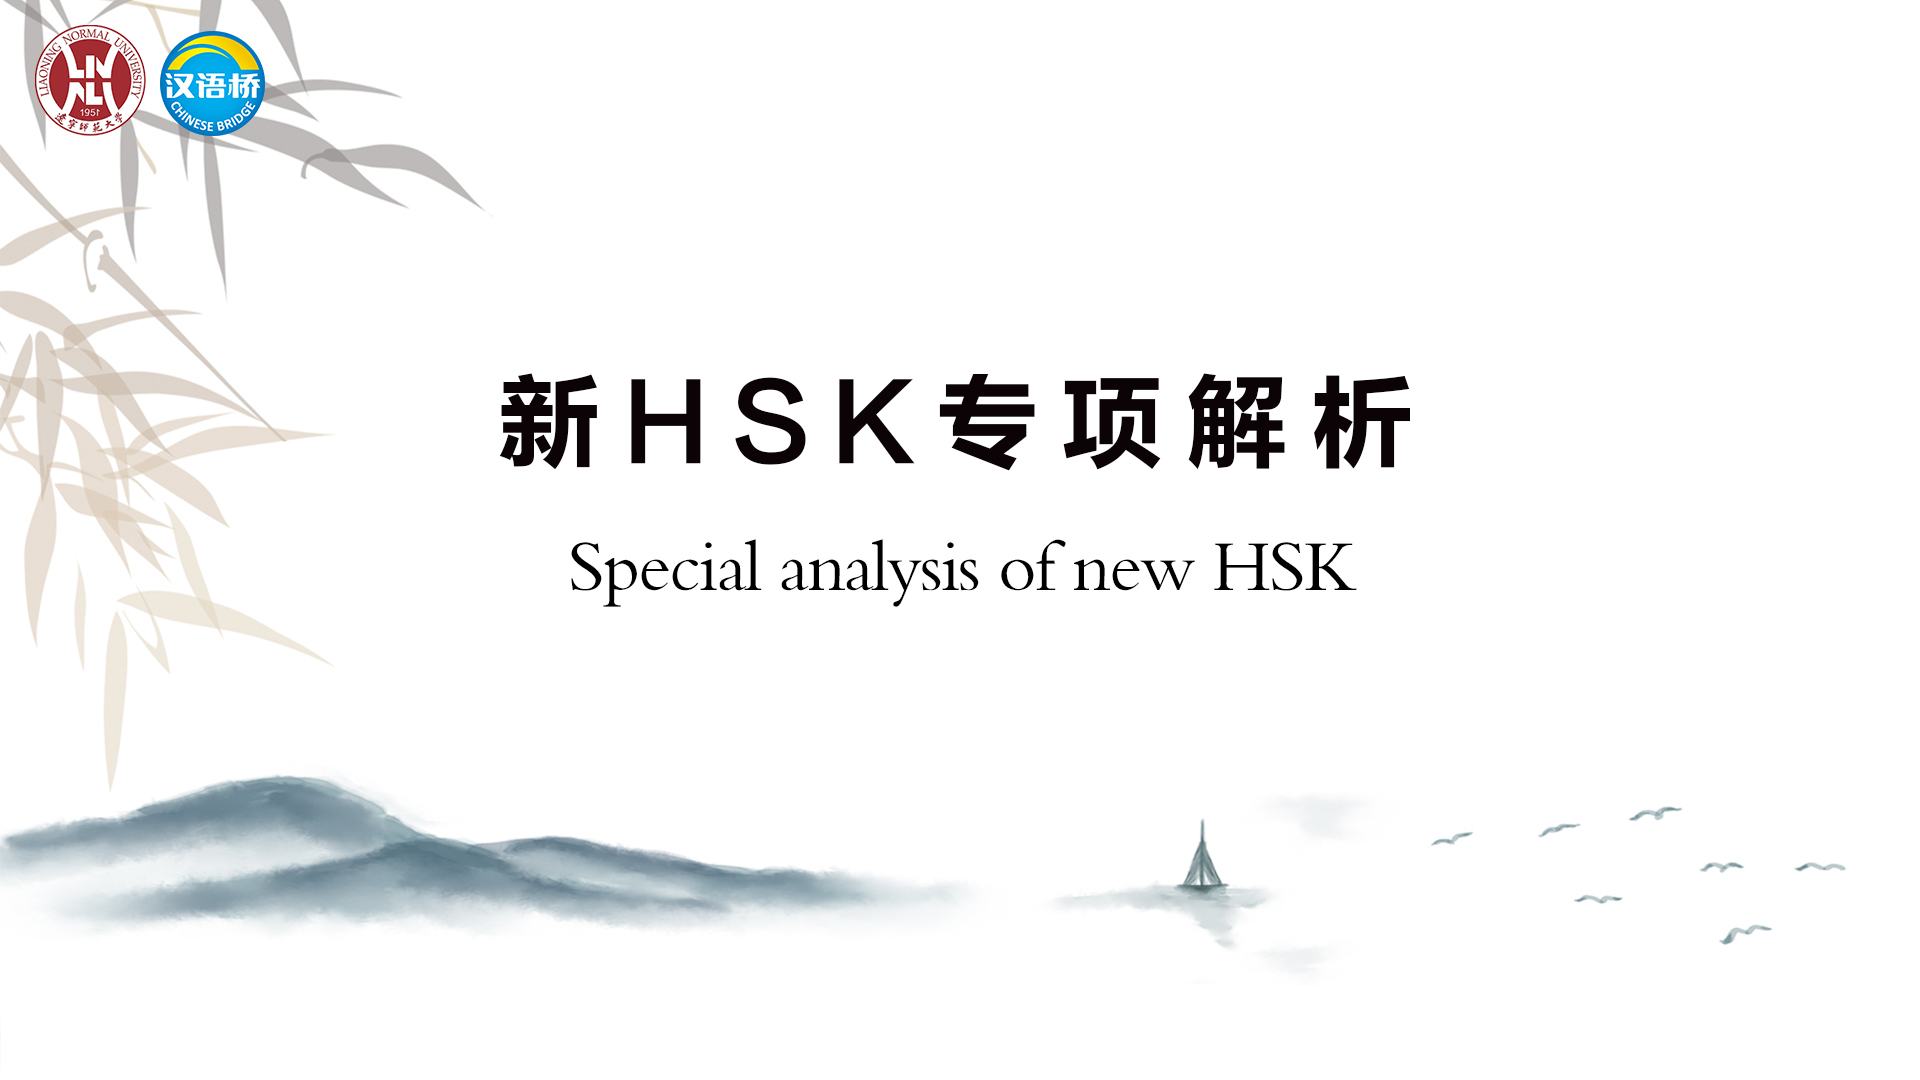 Special Analysis of New HSK